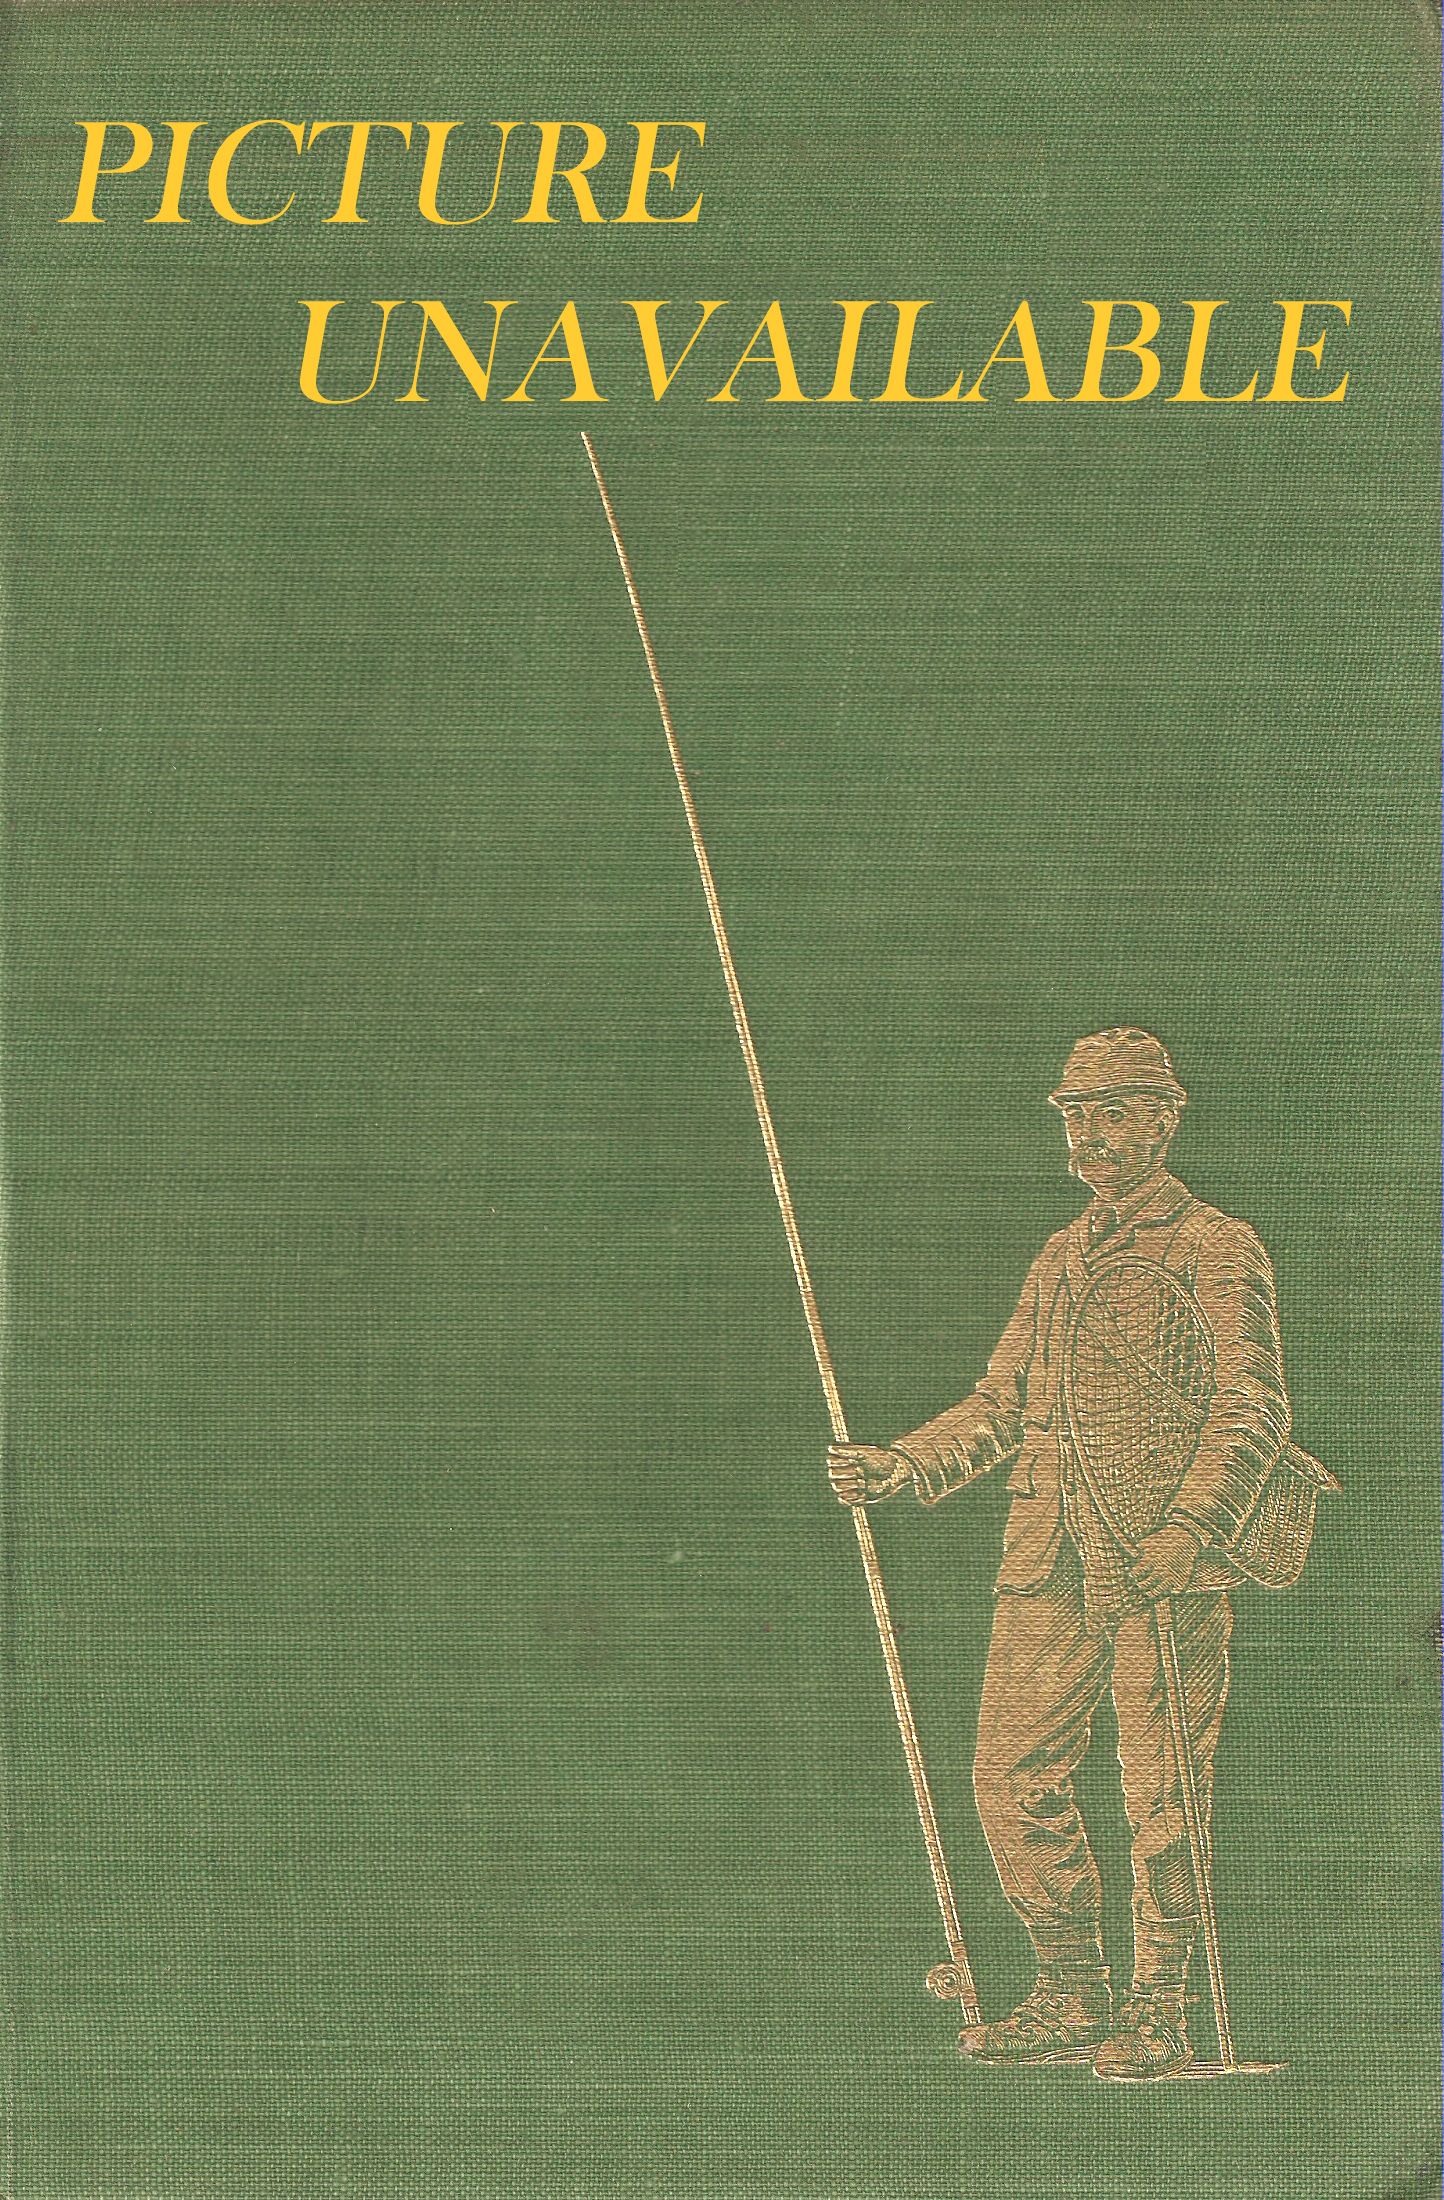 THE COMPLEAT ANGLER. By Izaak Walton and Charles Cotton. Edited by Richard  Le Gallienne. Illustrated by Edmund H. New. The First Le Gallienne  Edition. Coigney 182.